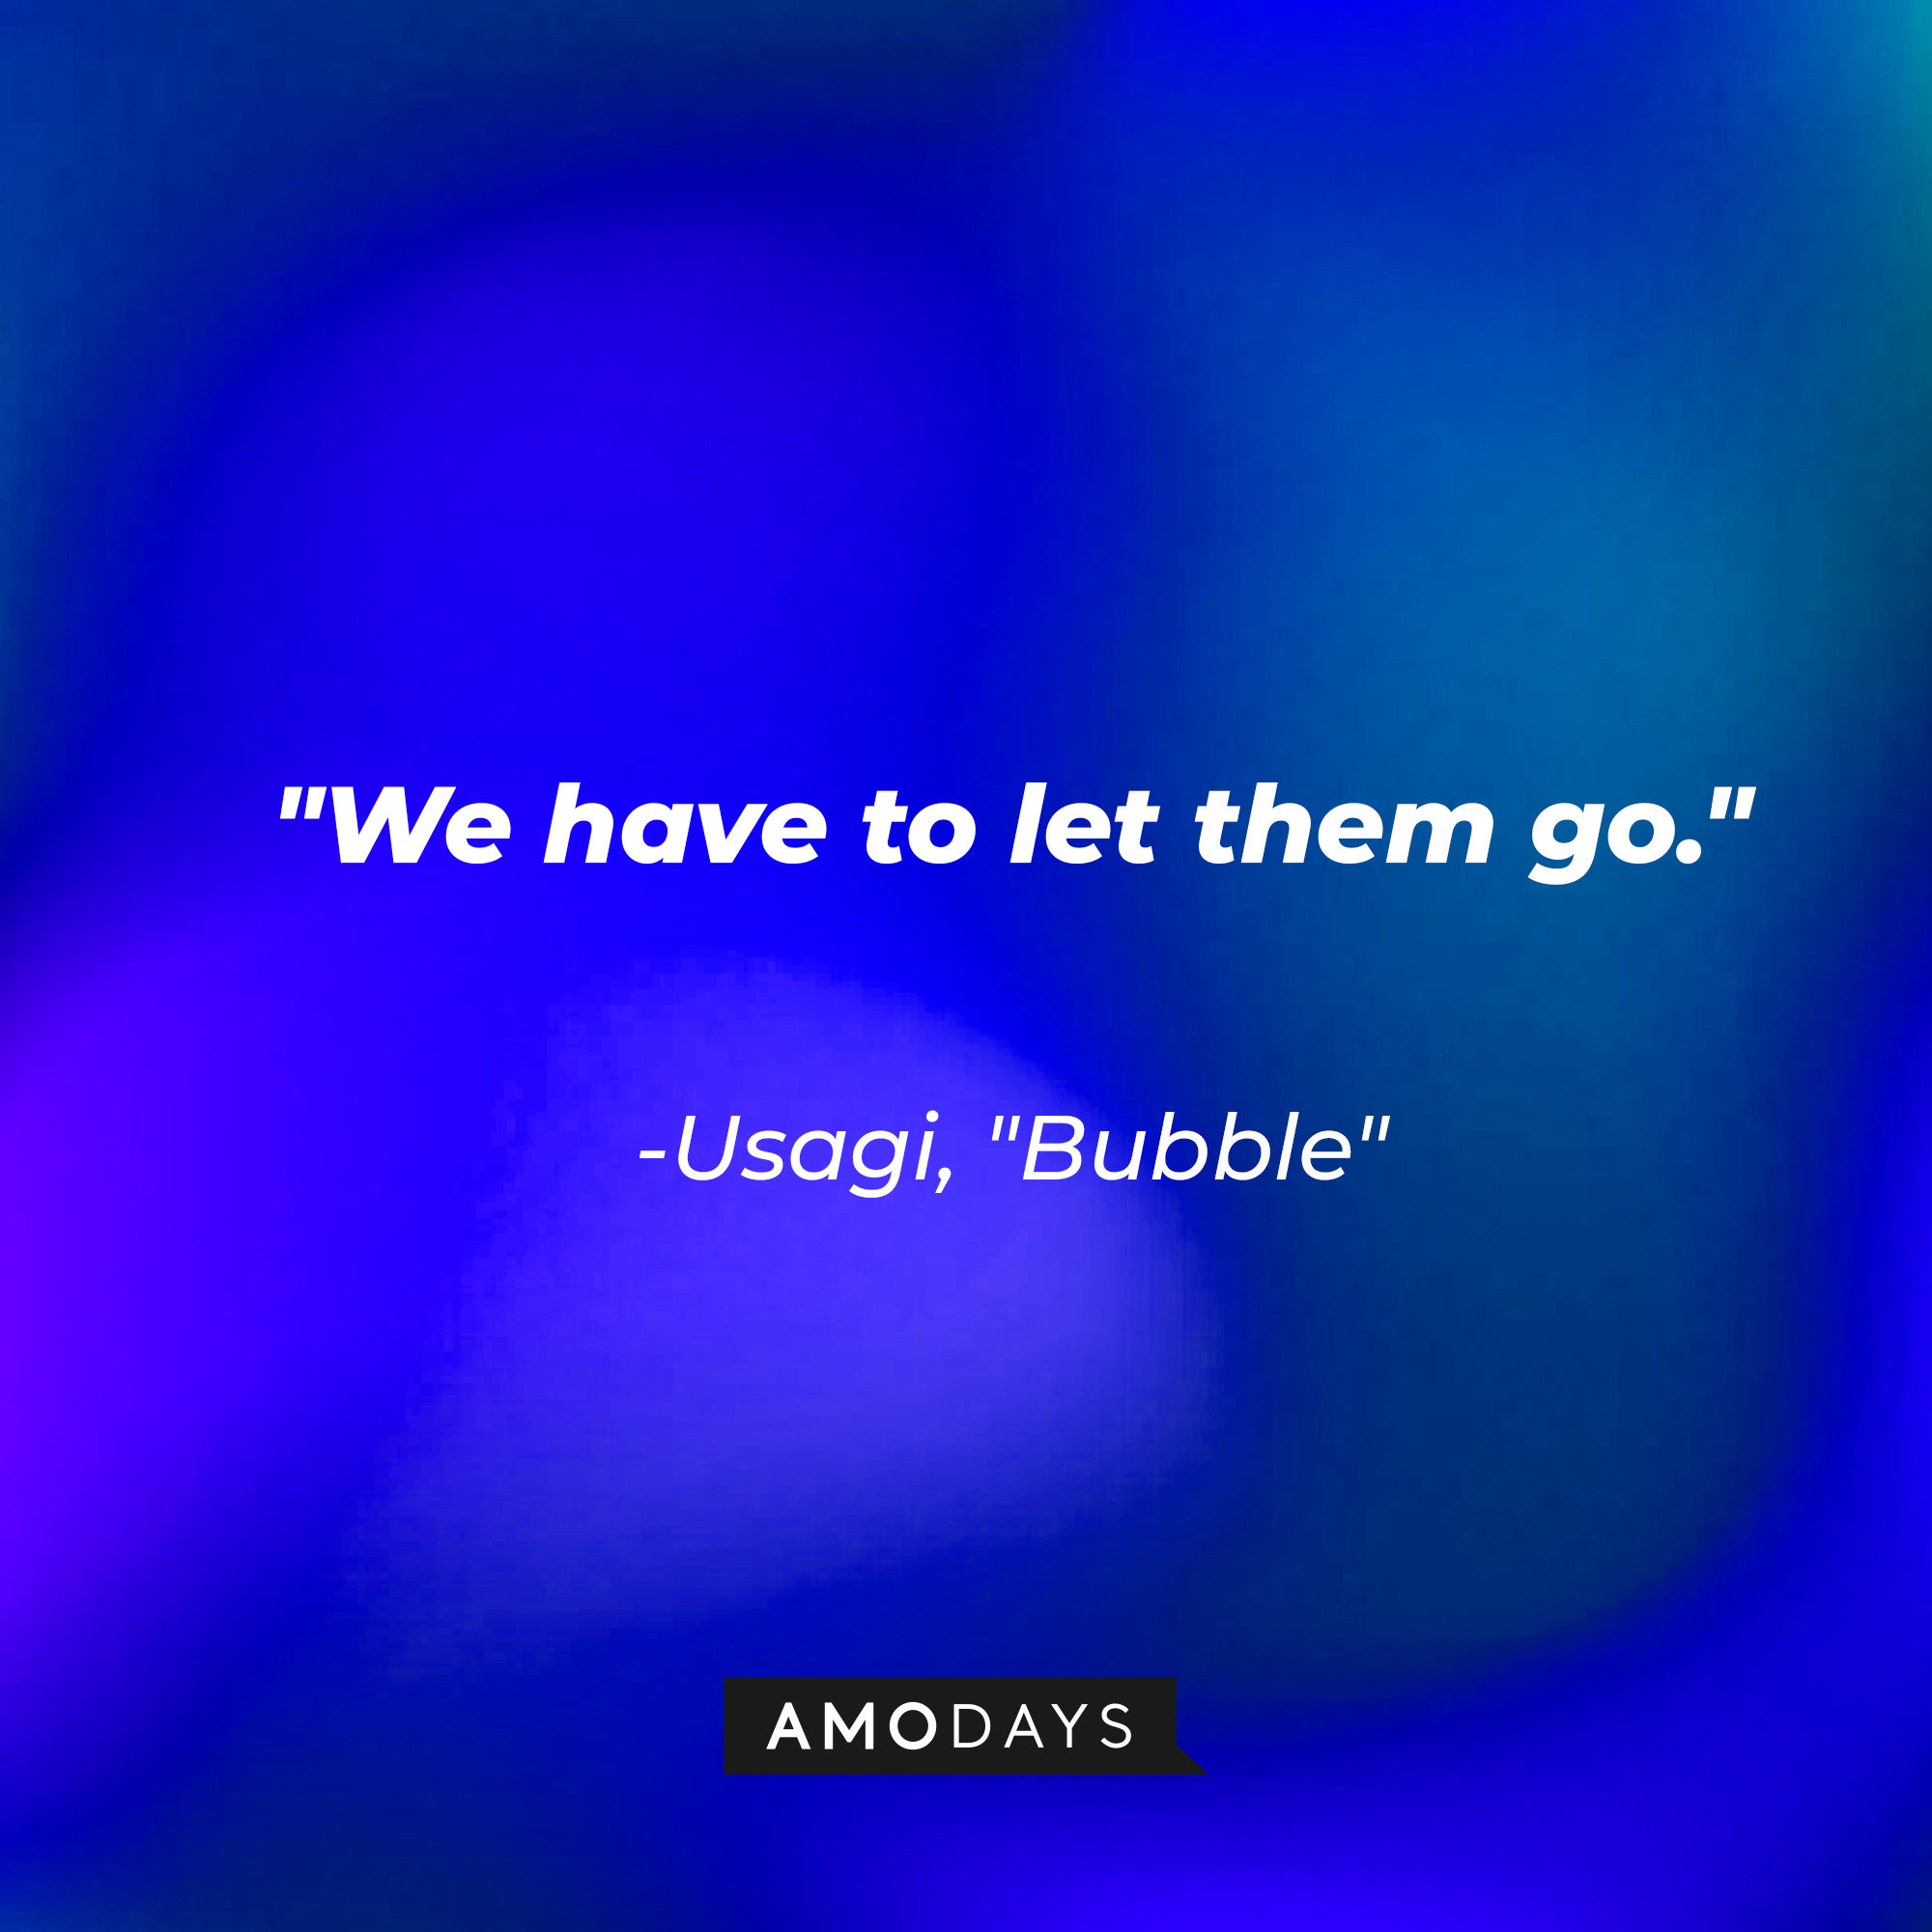 Makoto's quote on "Bubble:" "We have to let them go." | Source: AmoDays